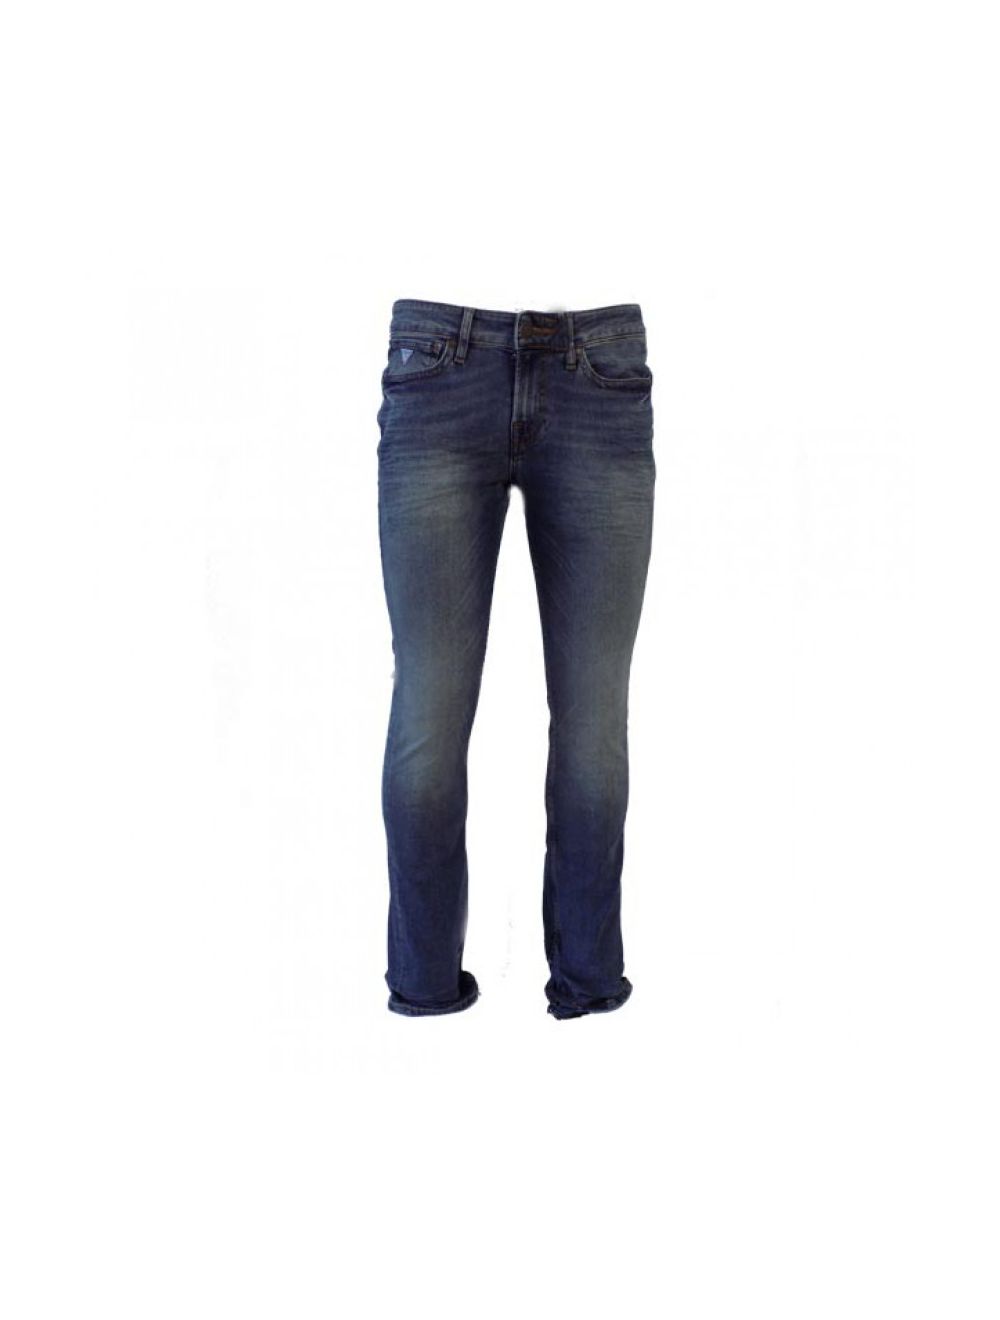 guess jeans mens